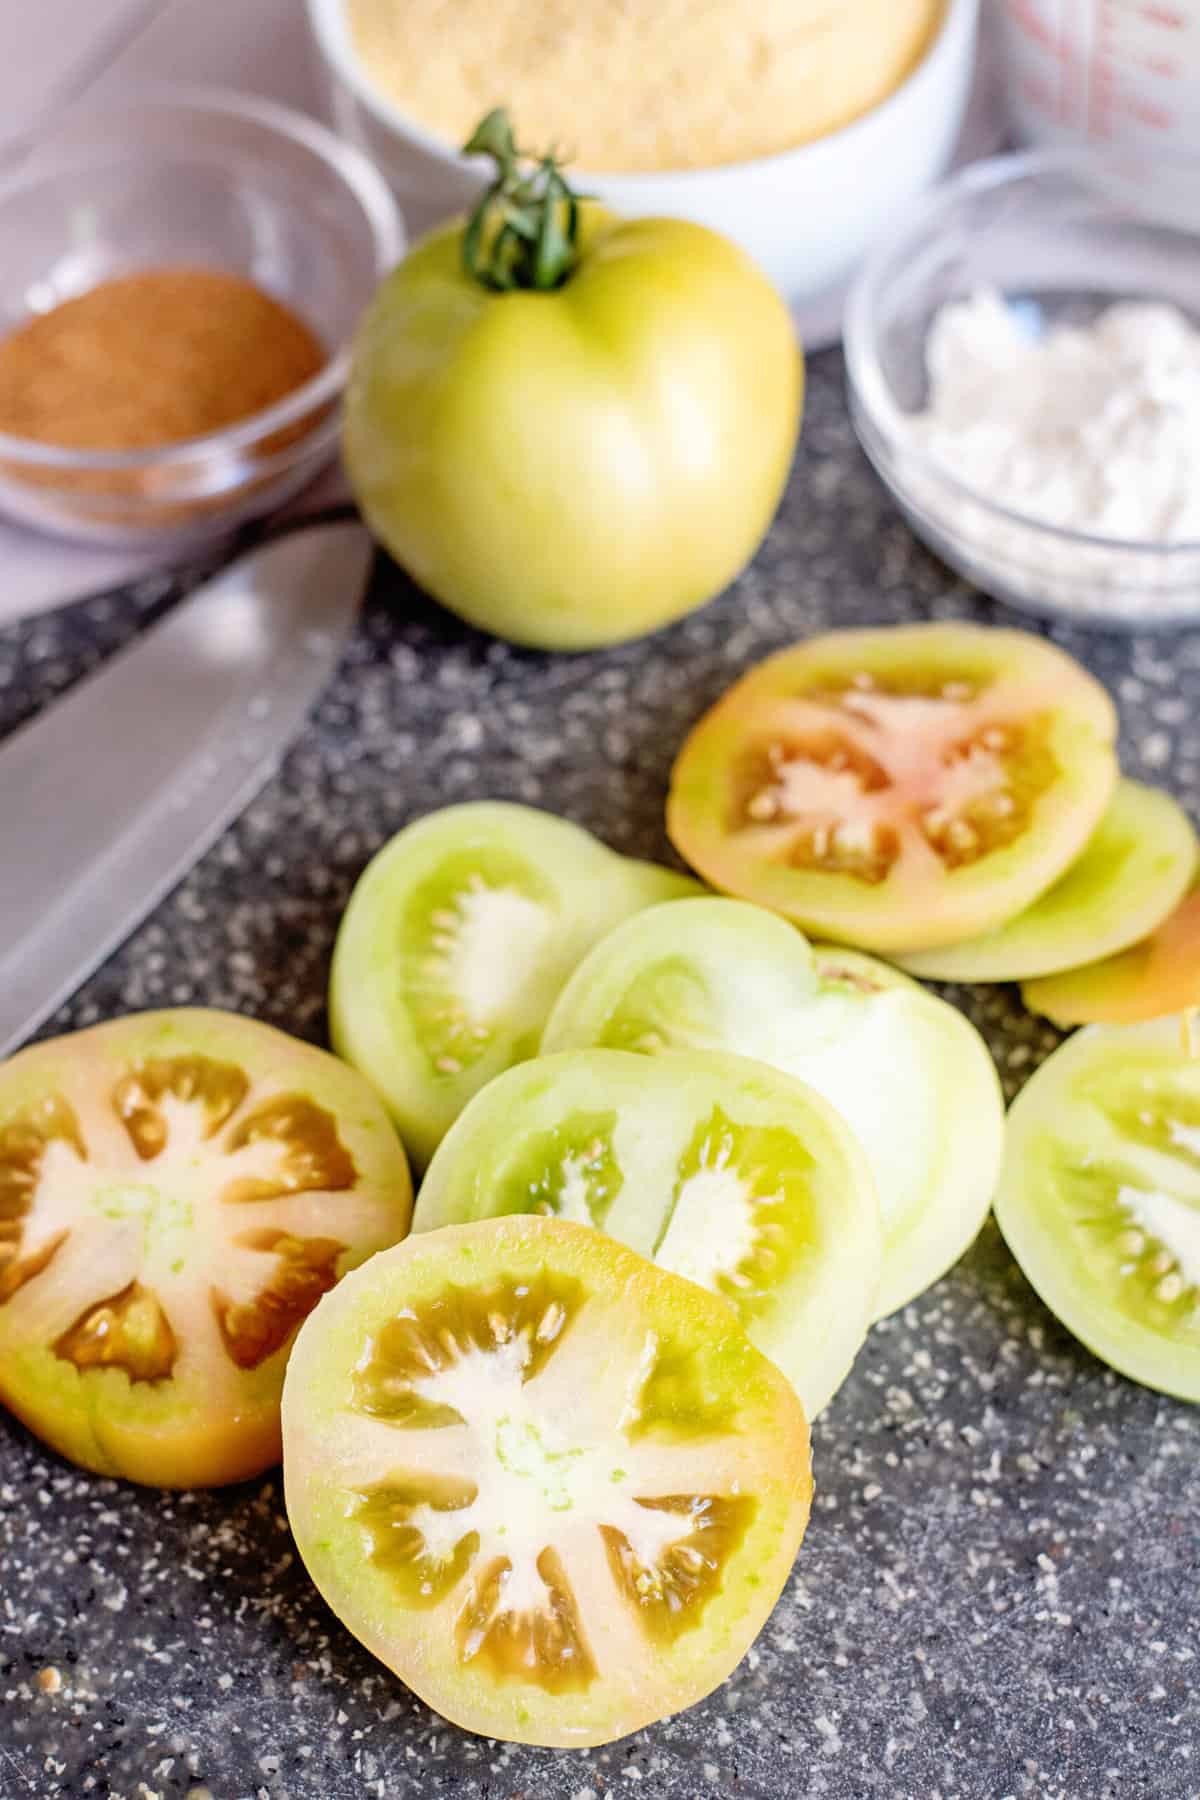 cut tomatoes into thick slices